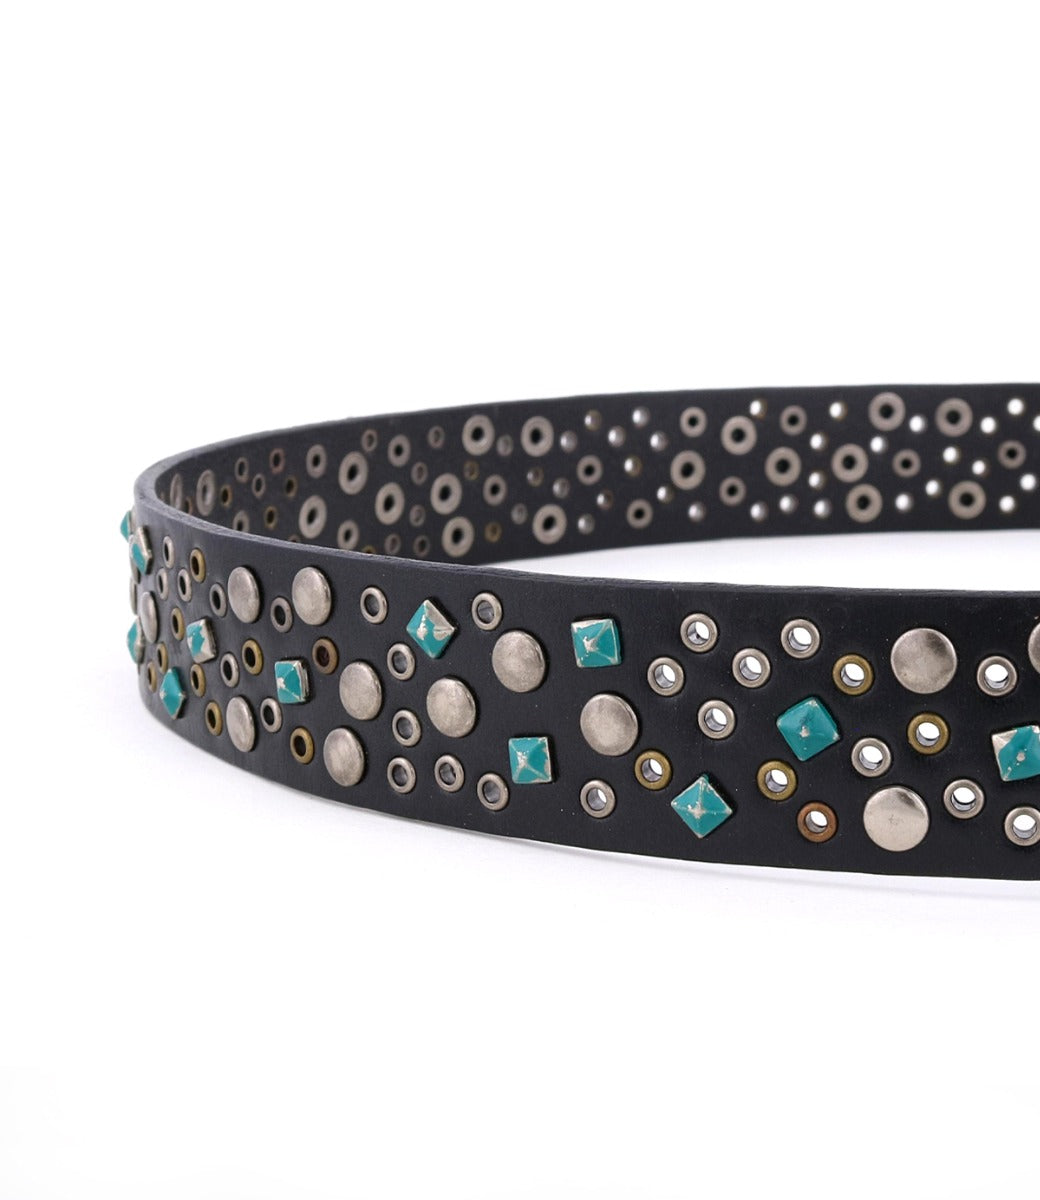 A Tammin II belt with turquoise studded stones by Bed Stu.